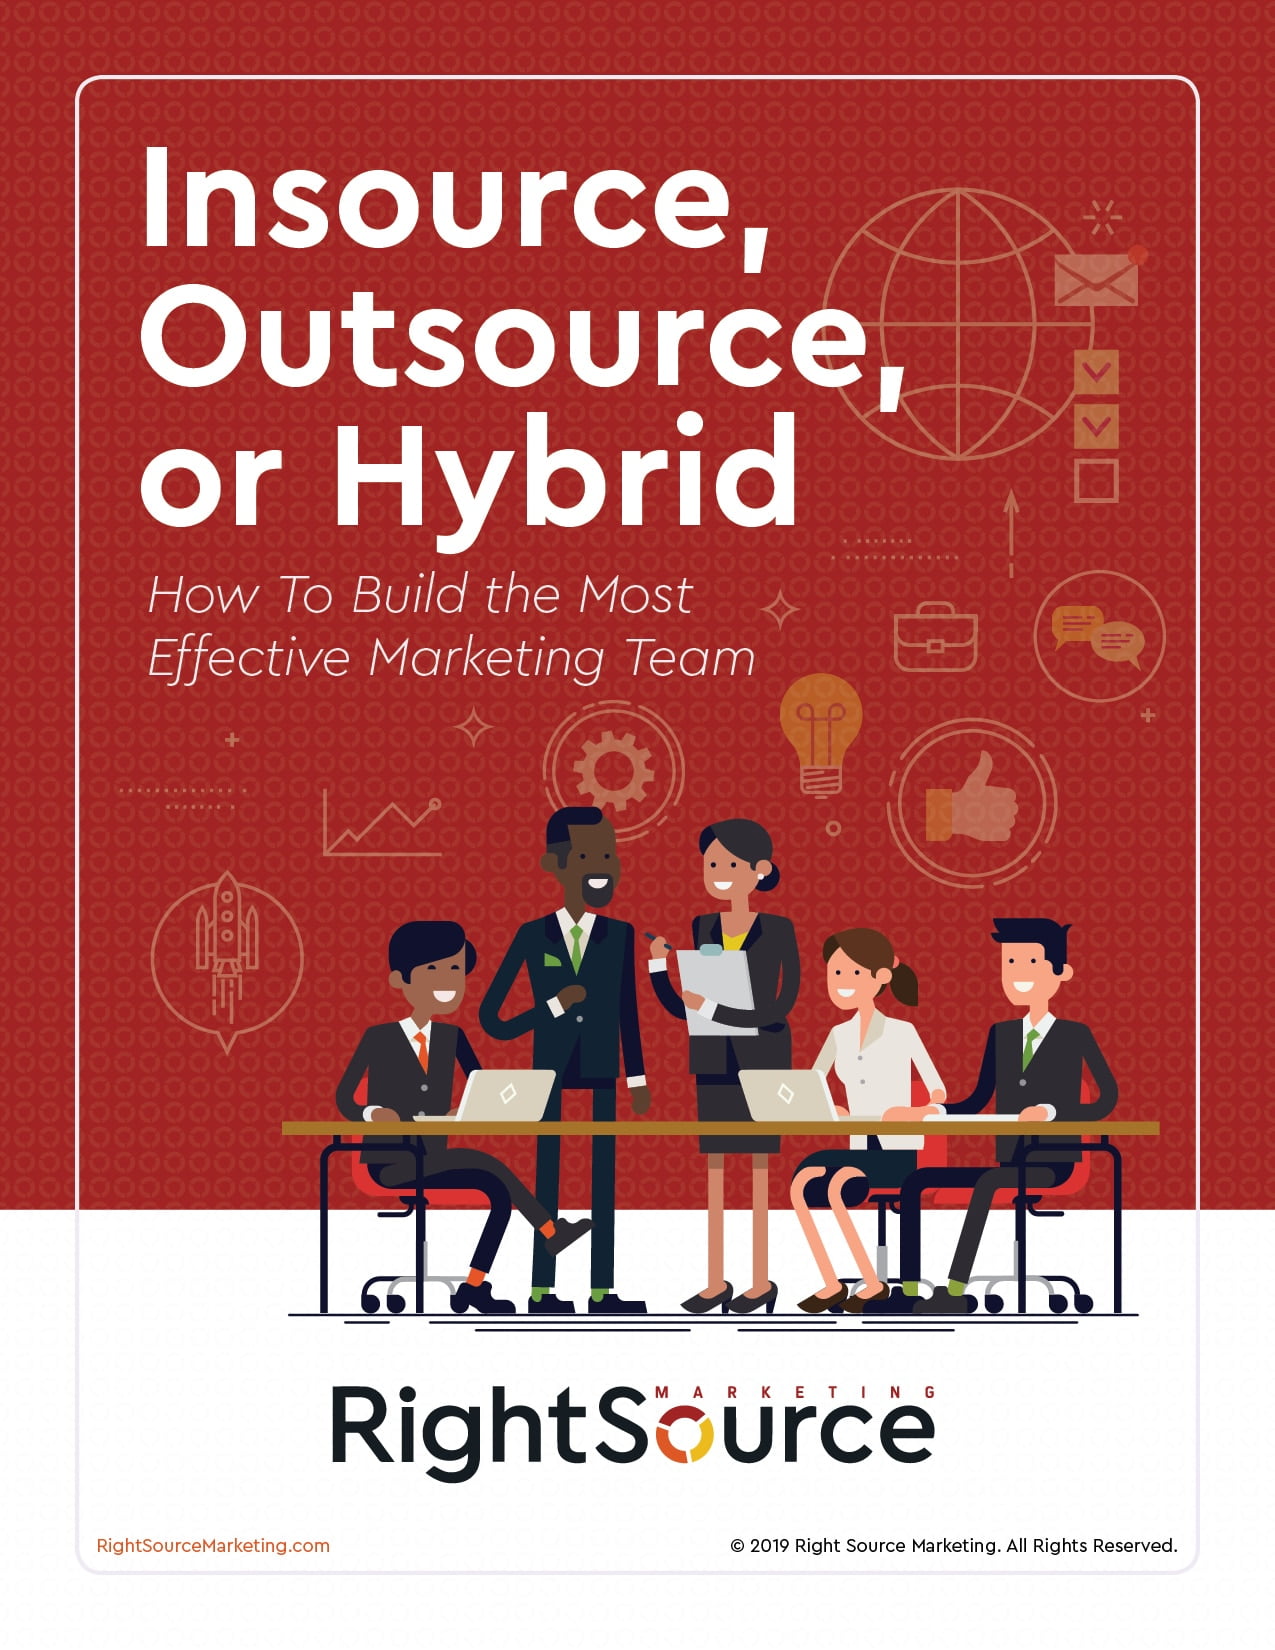 eBook: Insource, Outsource, or Hybrid: How to Build the Most Effective Marketing Team